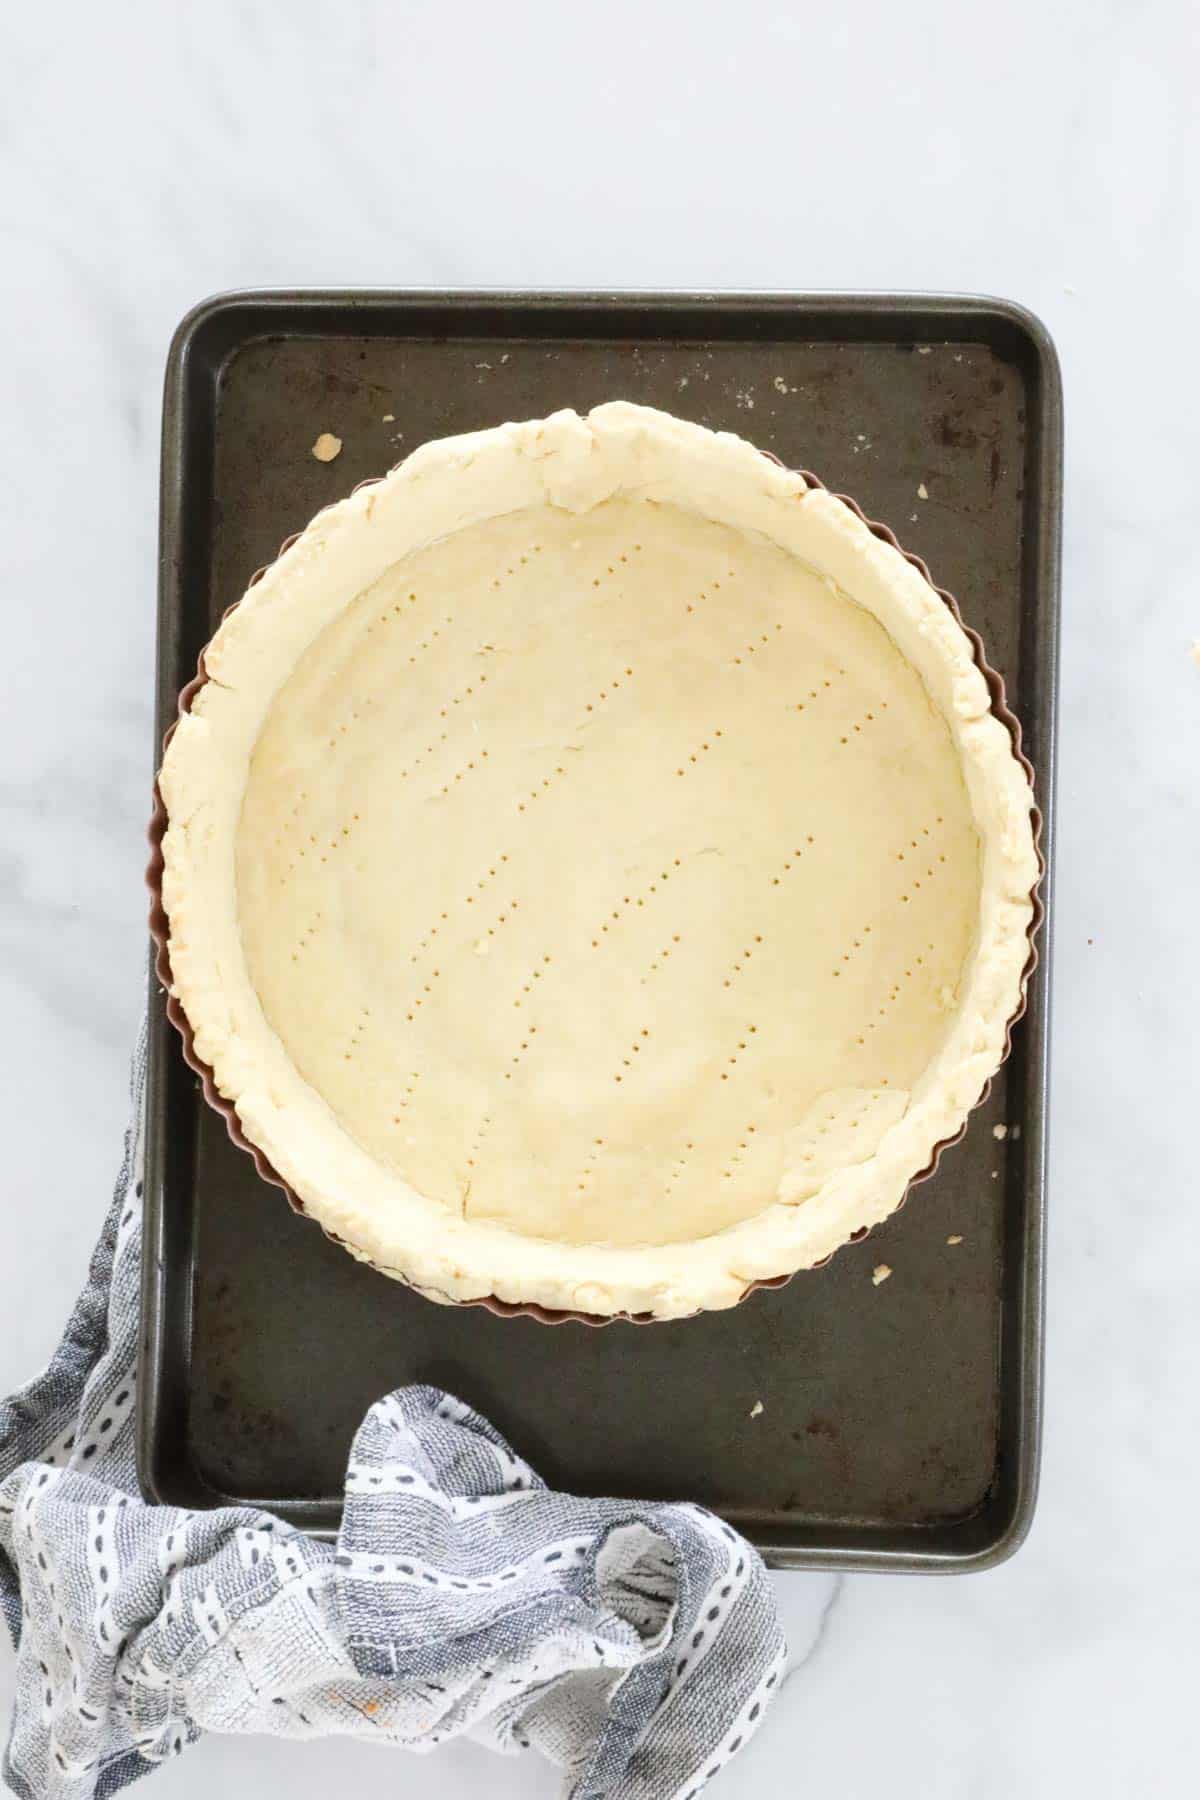 A shortcrust pastry shell on a baking tray.